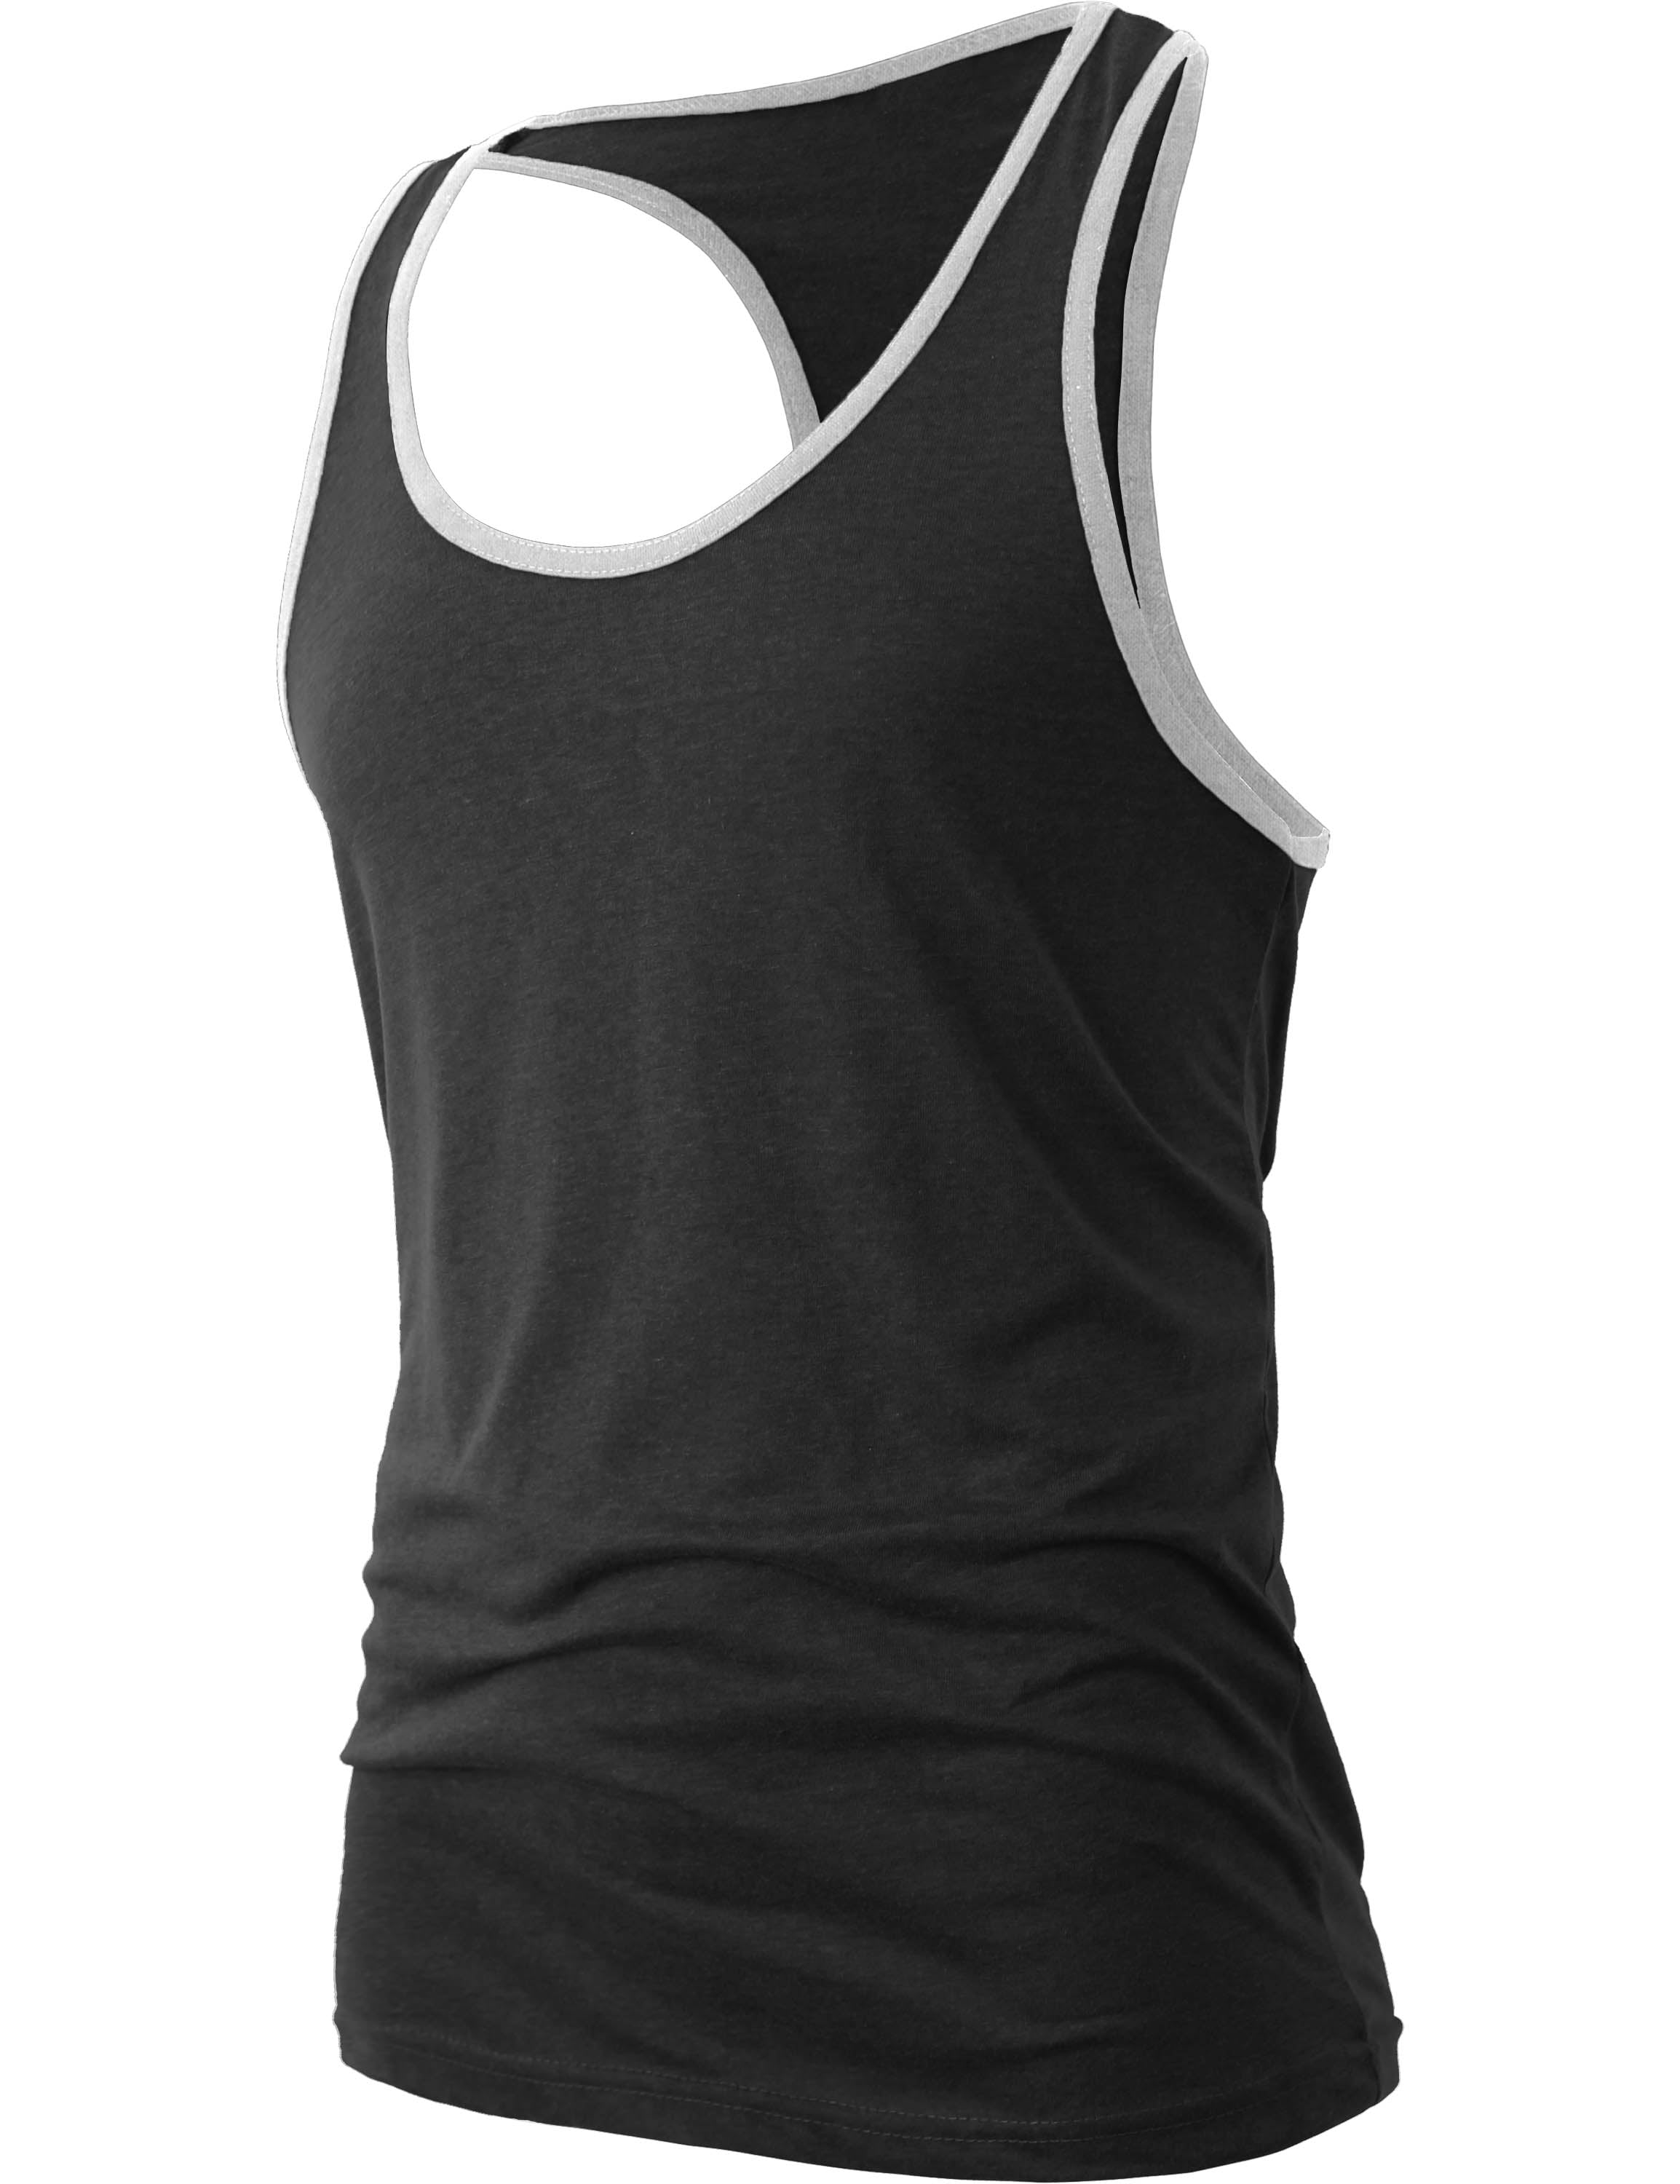 Ma Croix Men's Slim Fit Racer Back Tank Top with Contrast Binding ...